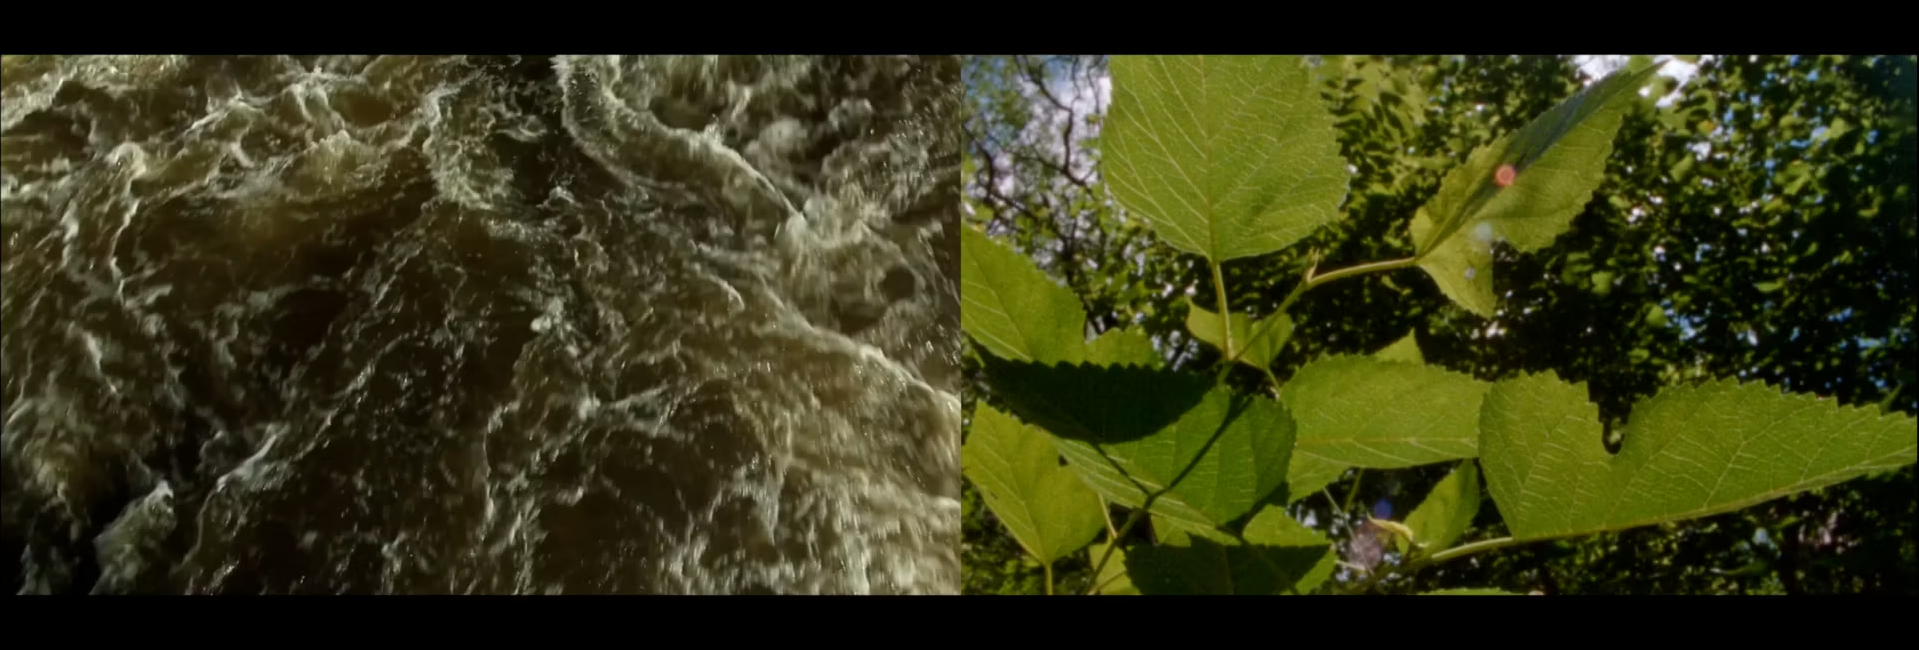 A dual screen capture of rushing water on the left and tree foliage on the right.